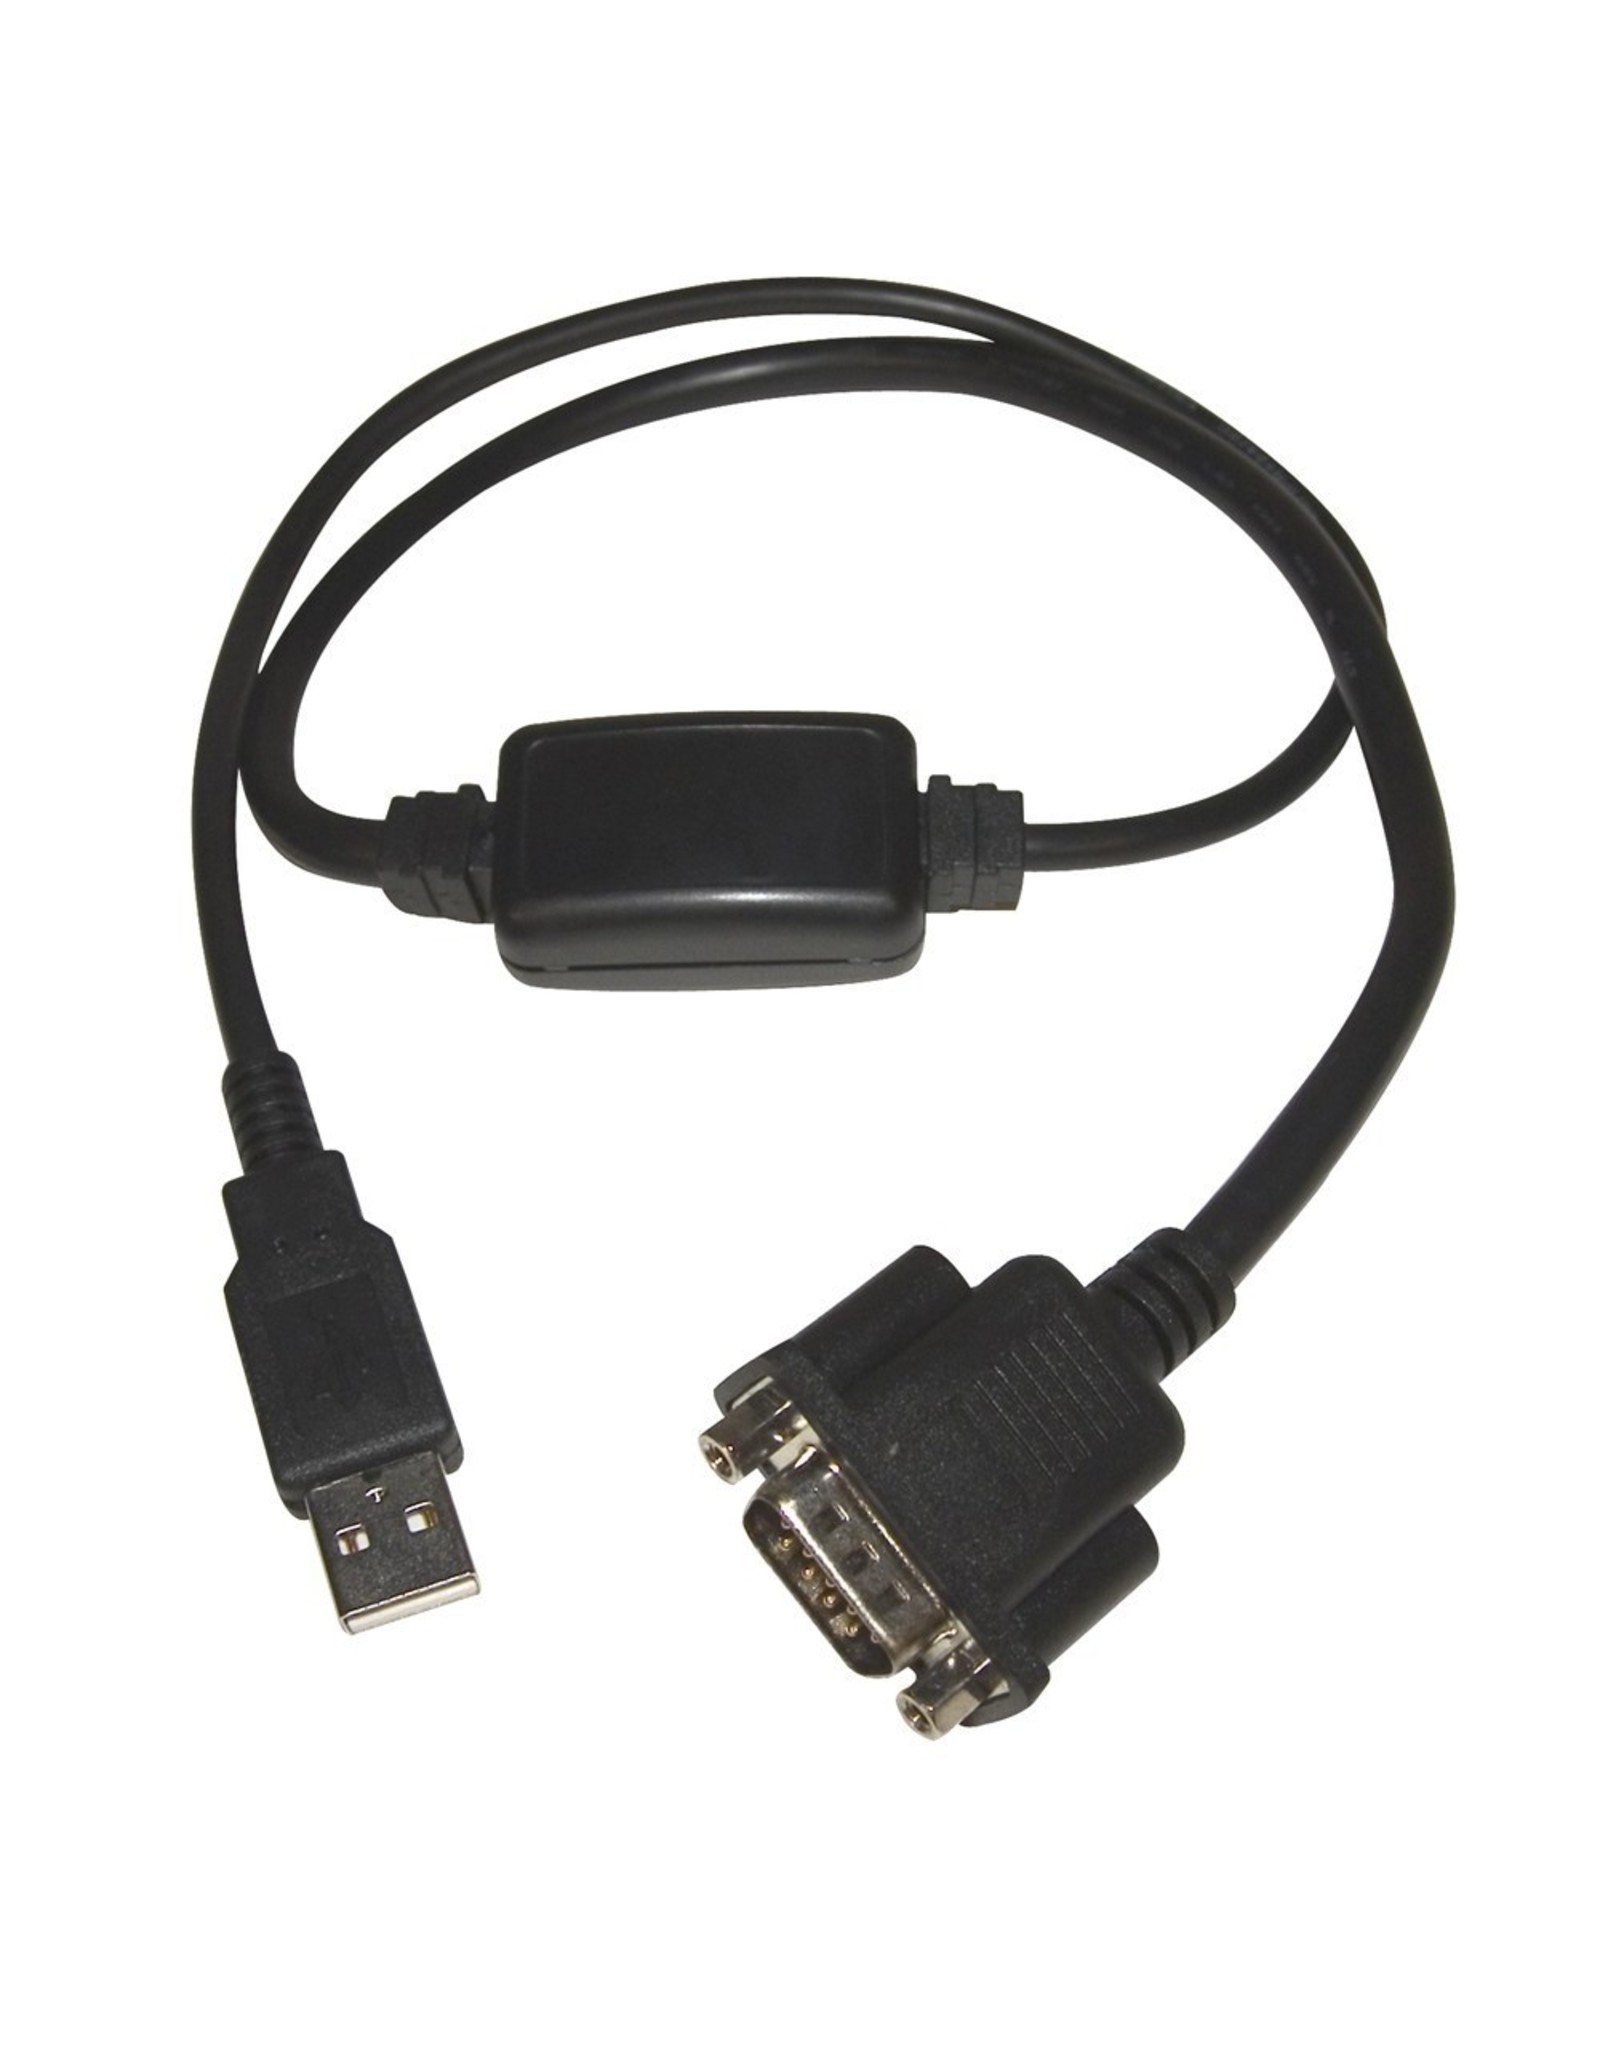 Meade USB to RS-232 (Serial) Adapter